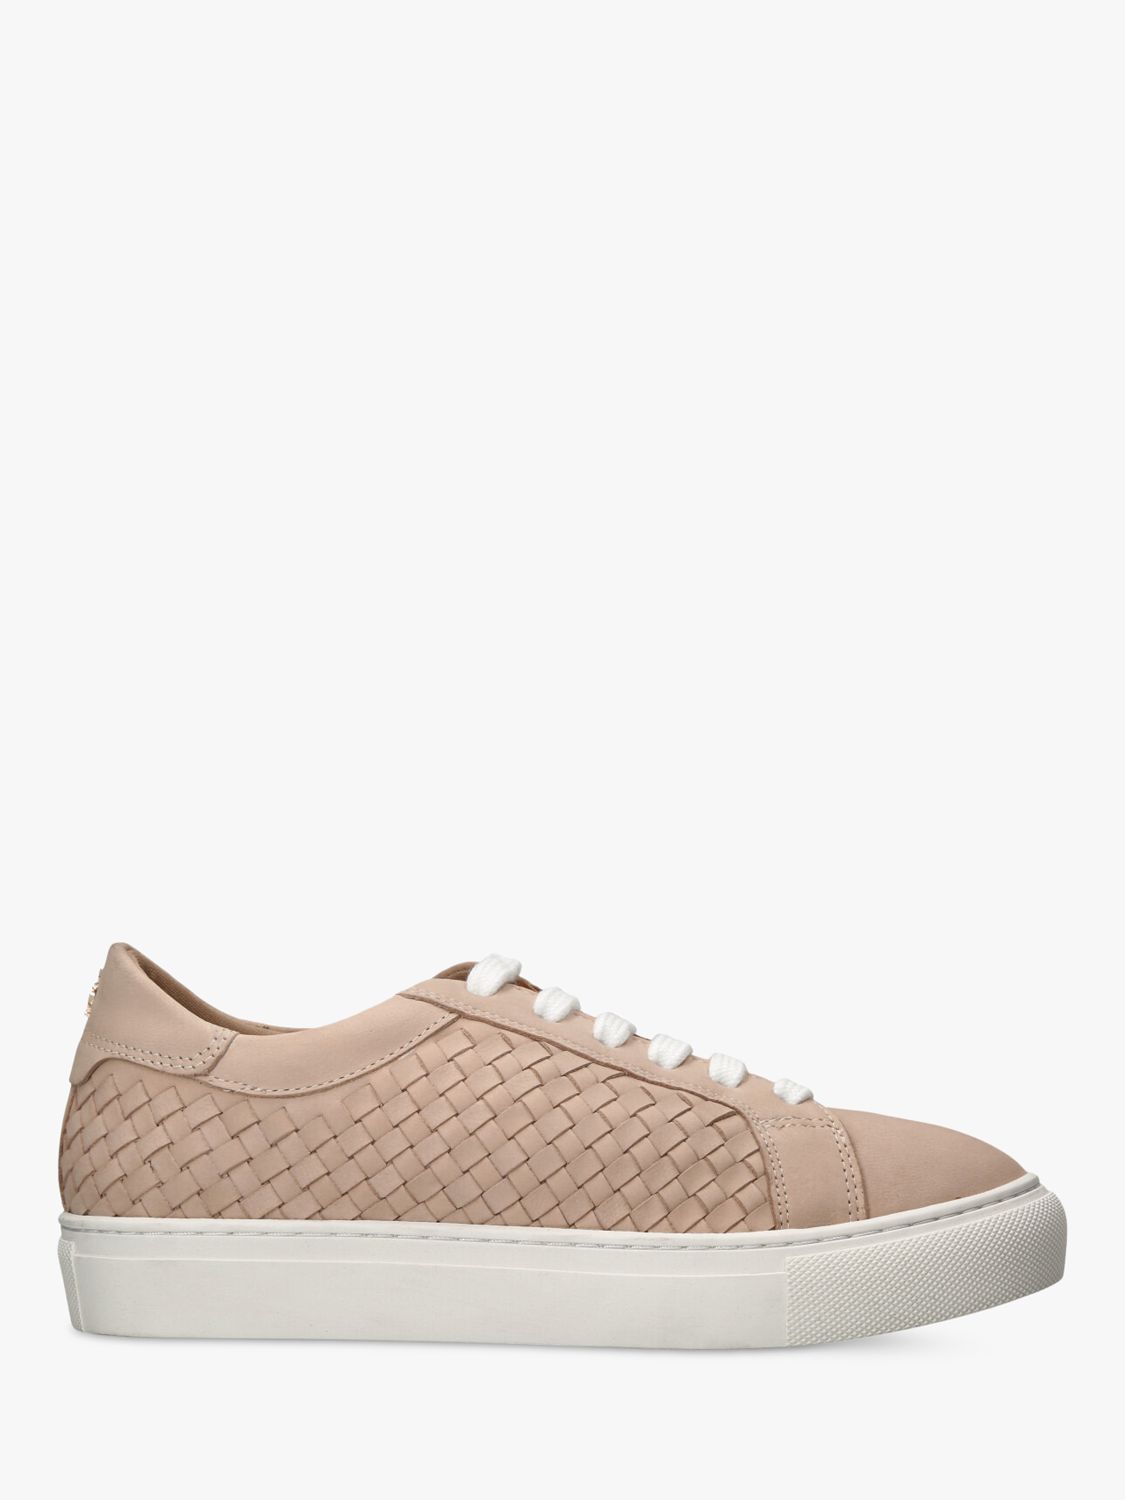 KG Kurt Geiger Dulwich Leather Weave Trainers, Pink Blush at John Lewis ...